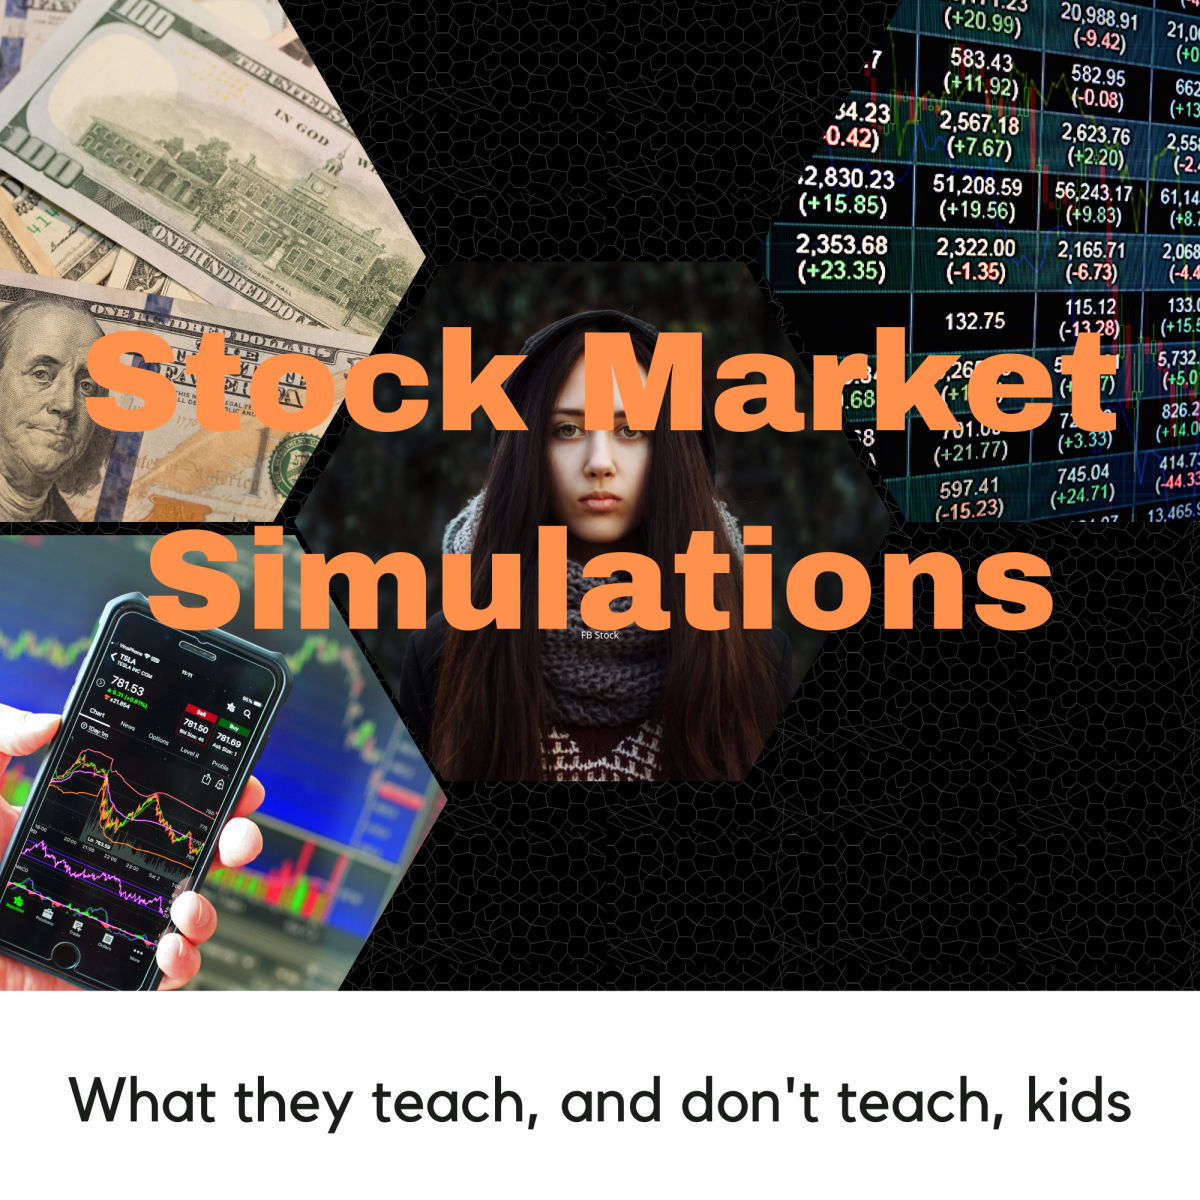 Stock Market Simulations: What They Teach and Don't Teach Kids